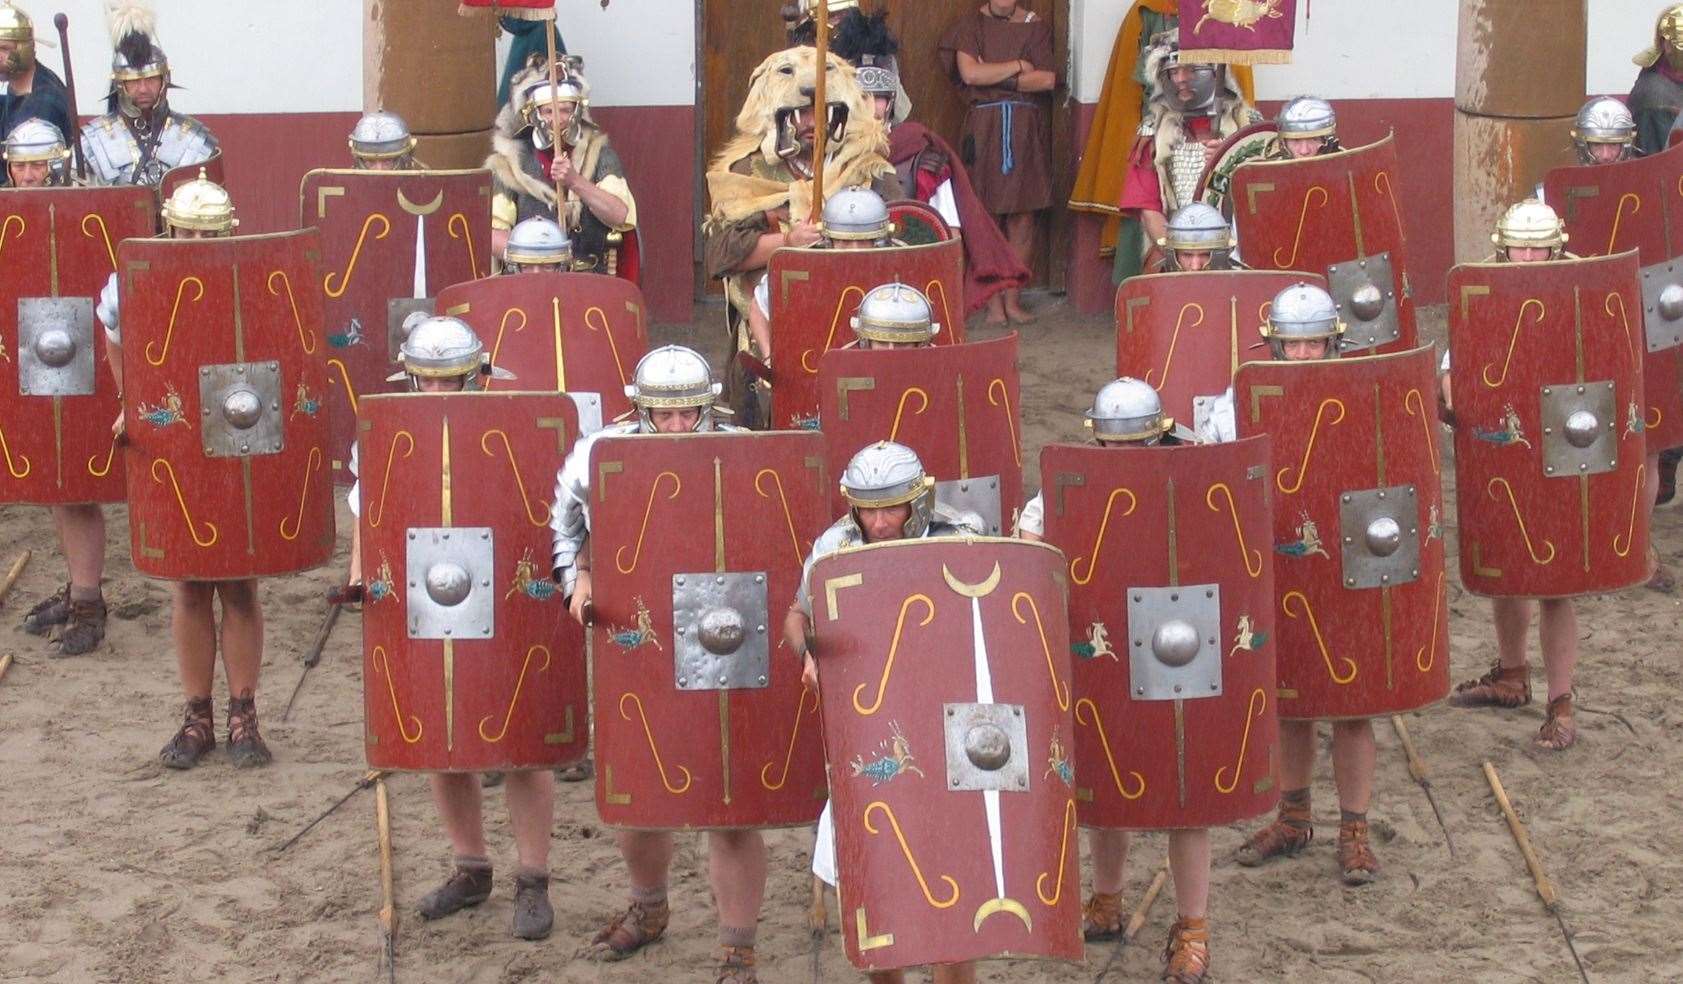 The Romans arrived in AD43 for the invasion which would see them conquer